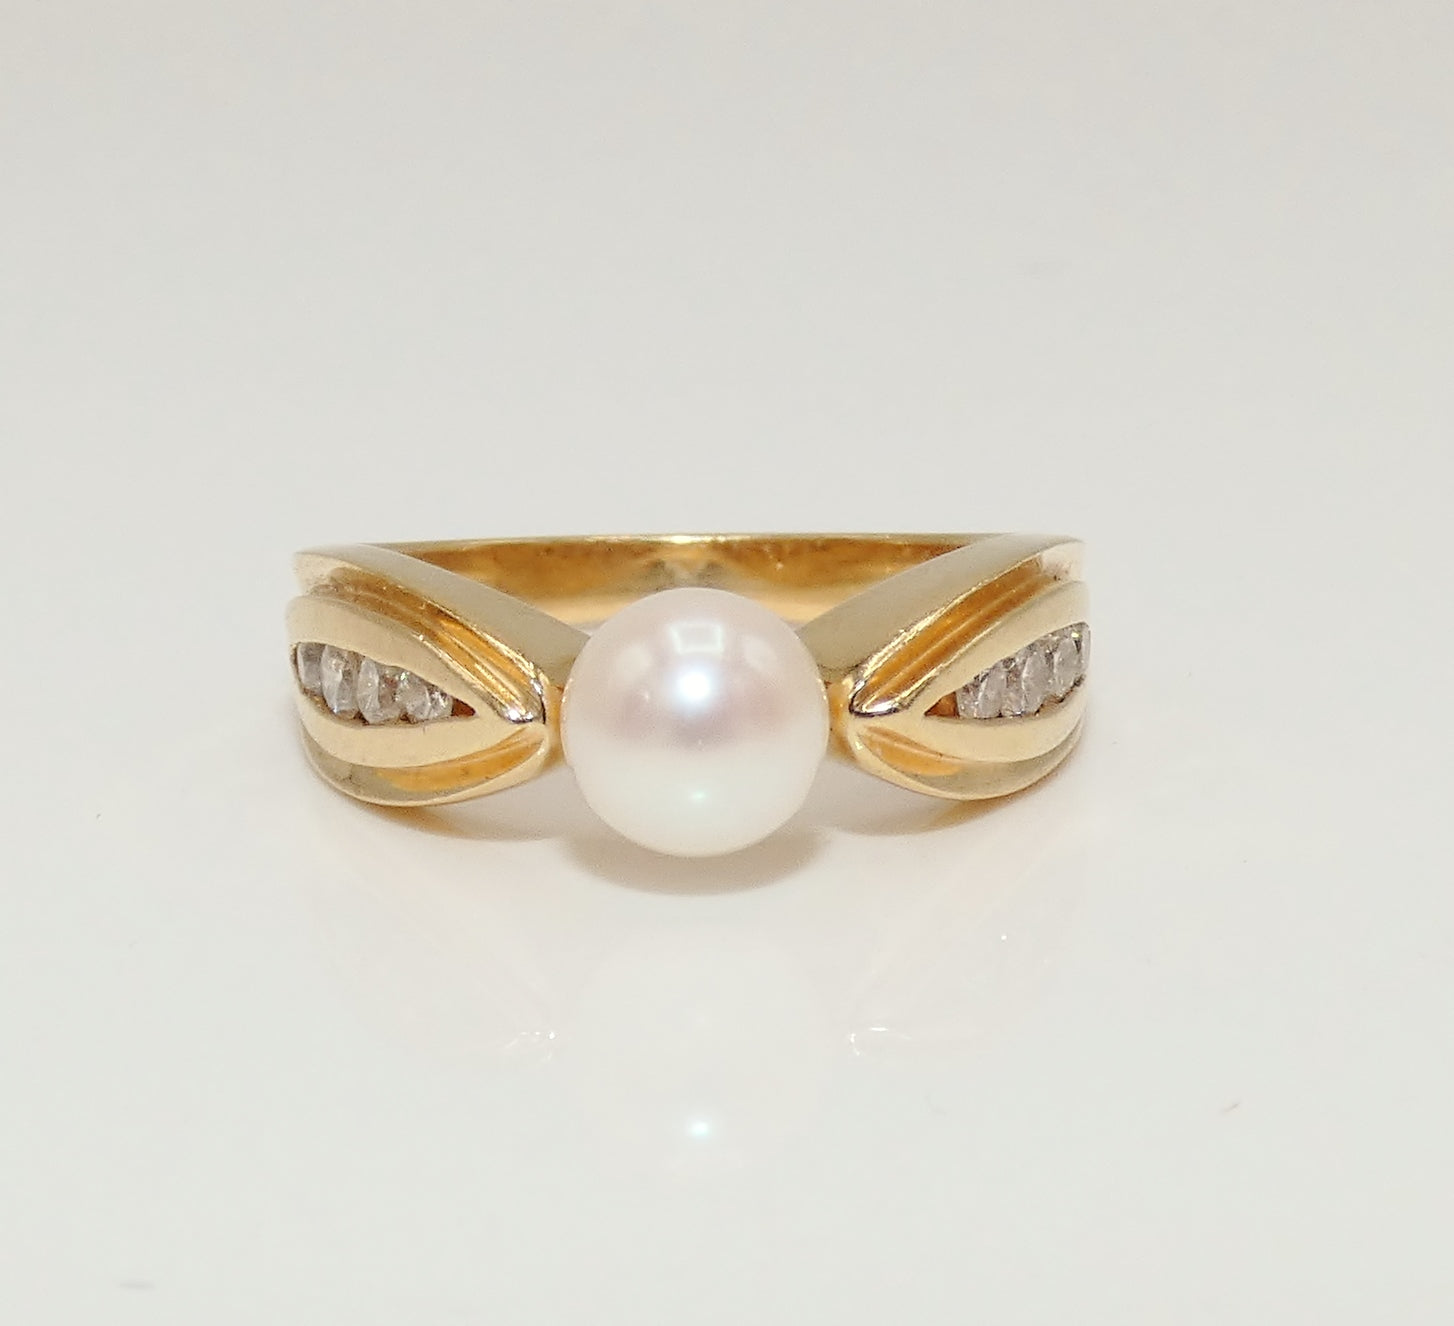 Diamond and Four Pearl Ring